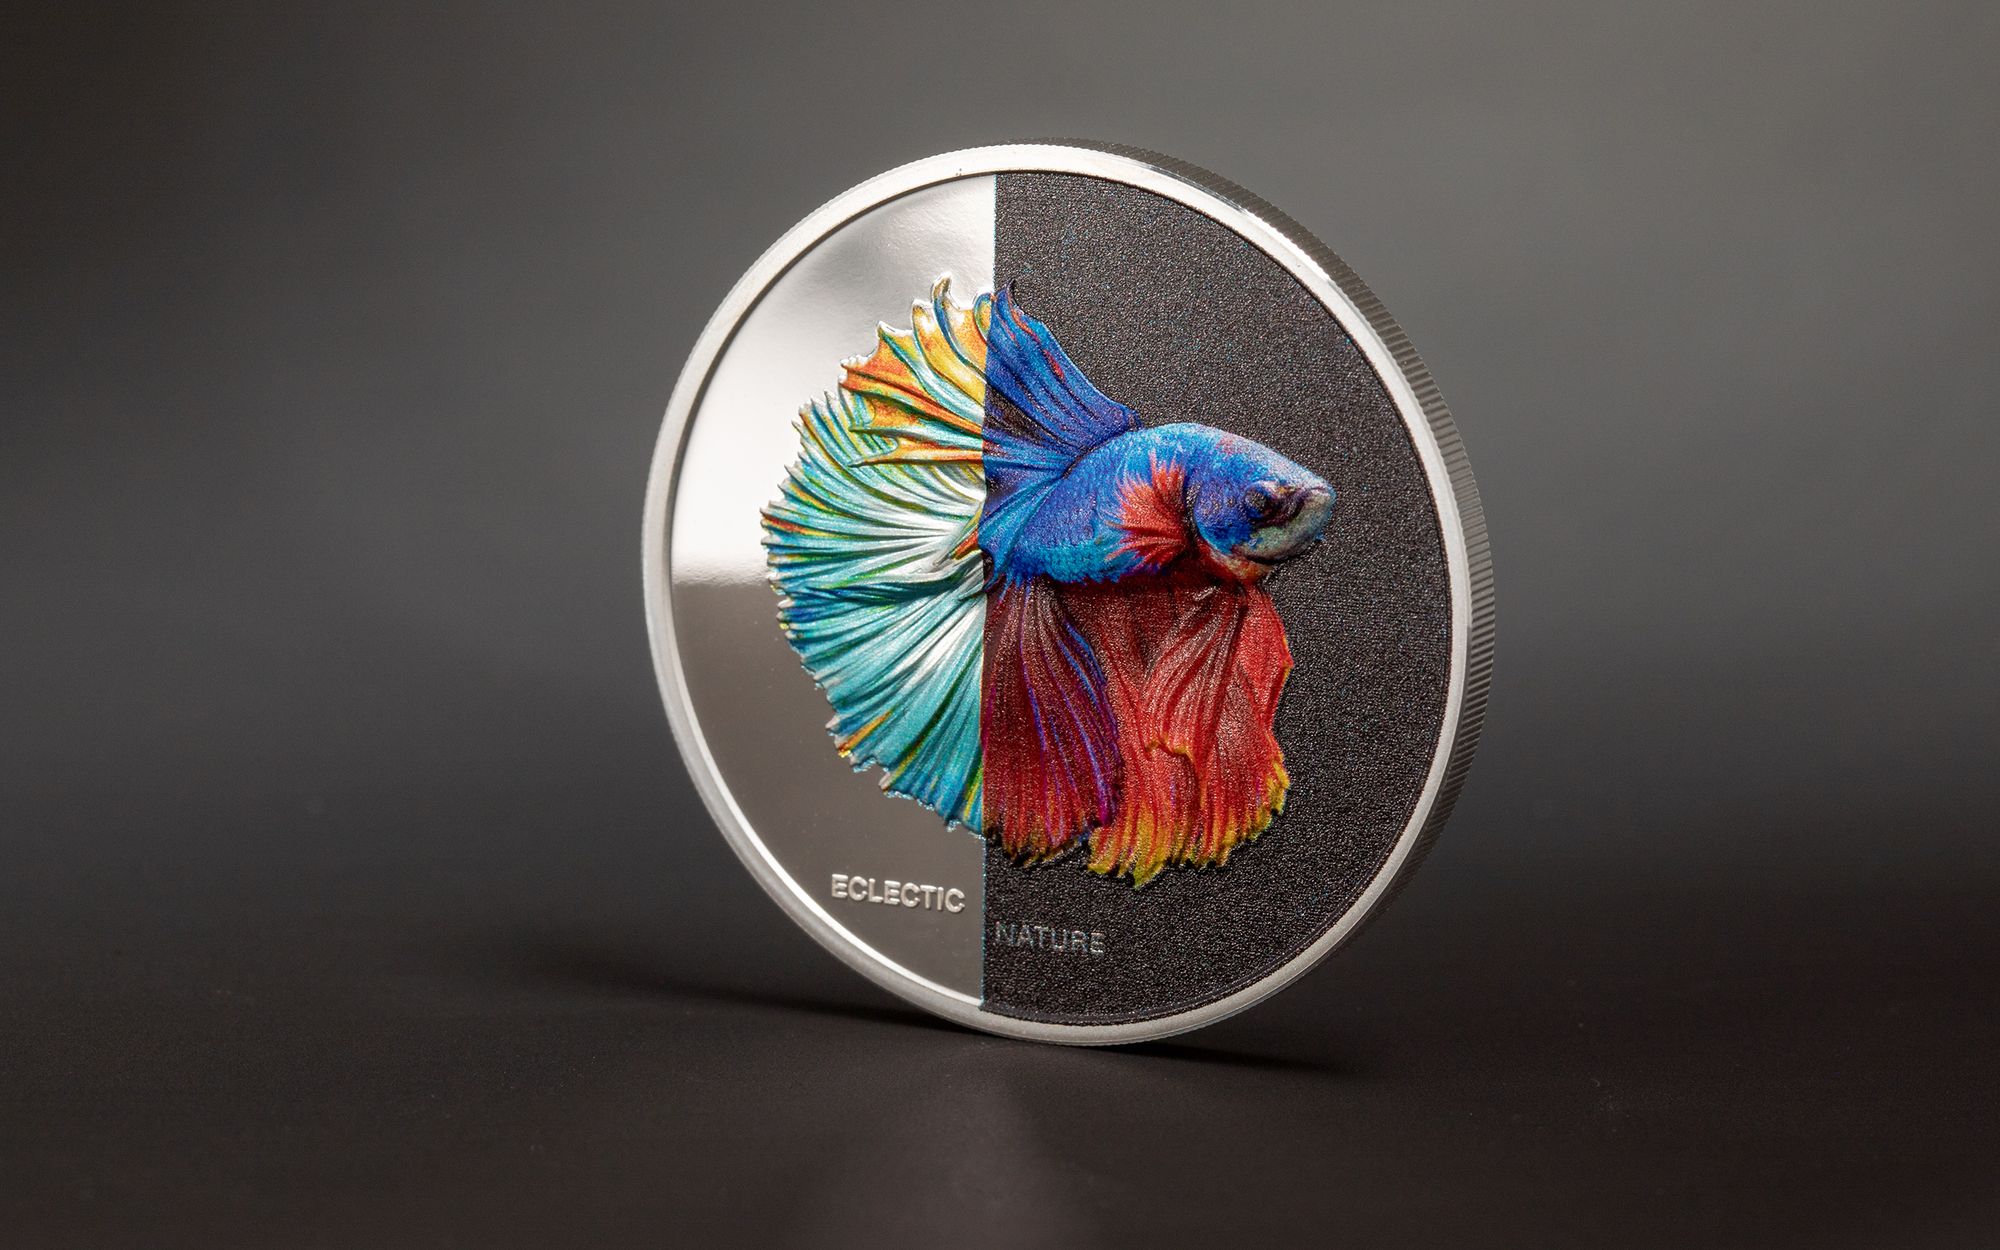 2021 Eclectic Nature Fighting Fish 1 oz Silver Coin